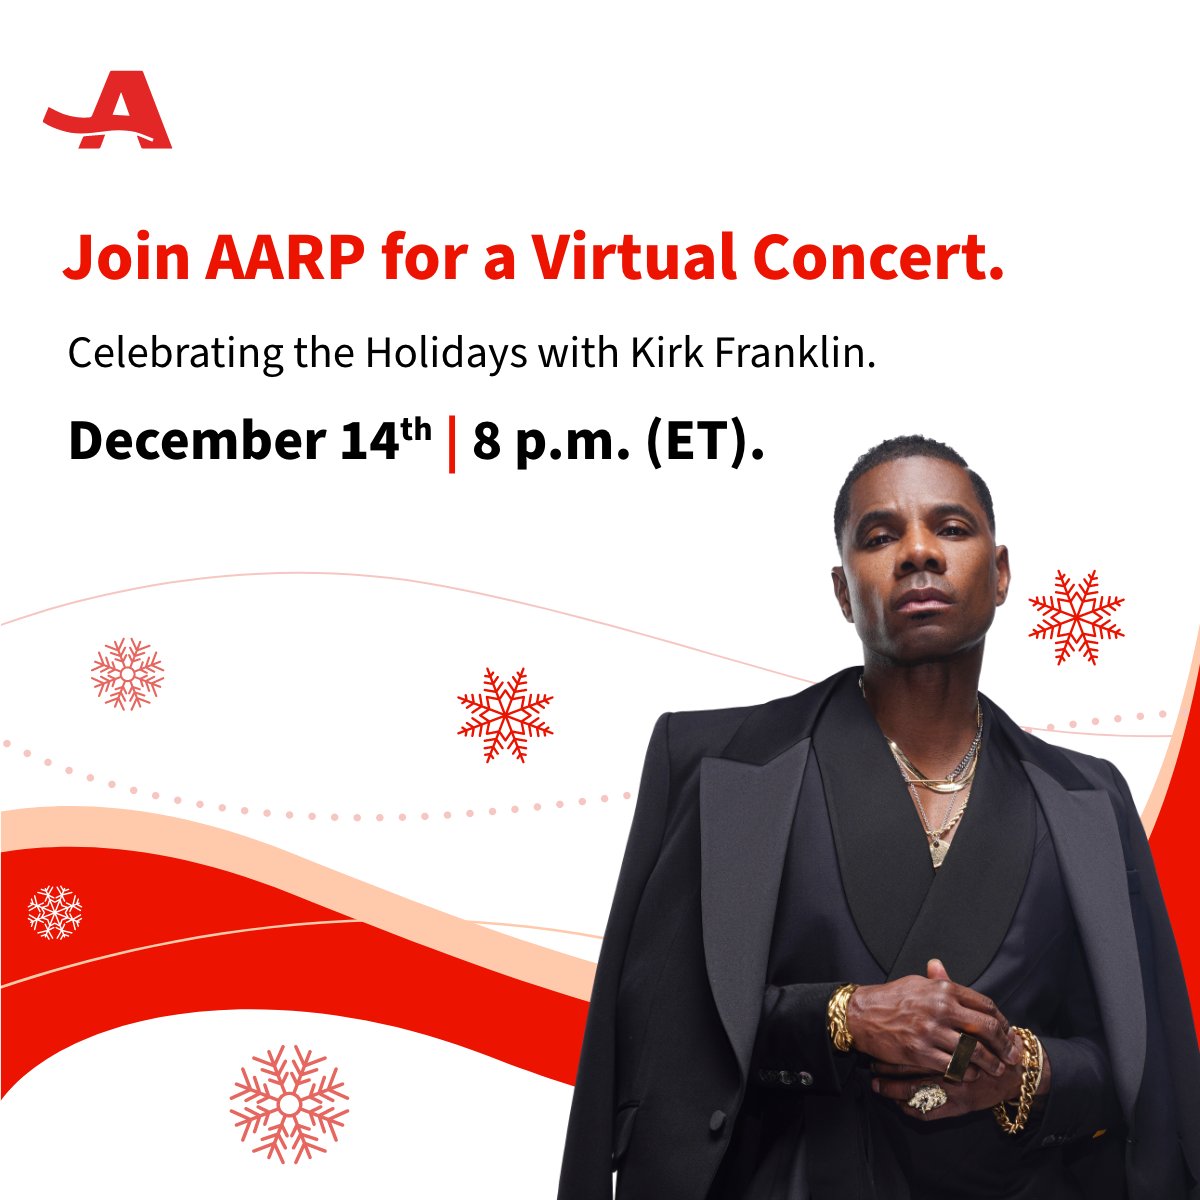 Join @AARP on December 14 for a virtual concert celebrating the holidays and learn important information on ways to spot and avoid common scams, featuring gospel singer Kirk Franklin. Visit spr.ly/6013ROcwb to register.